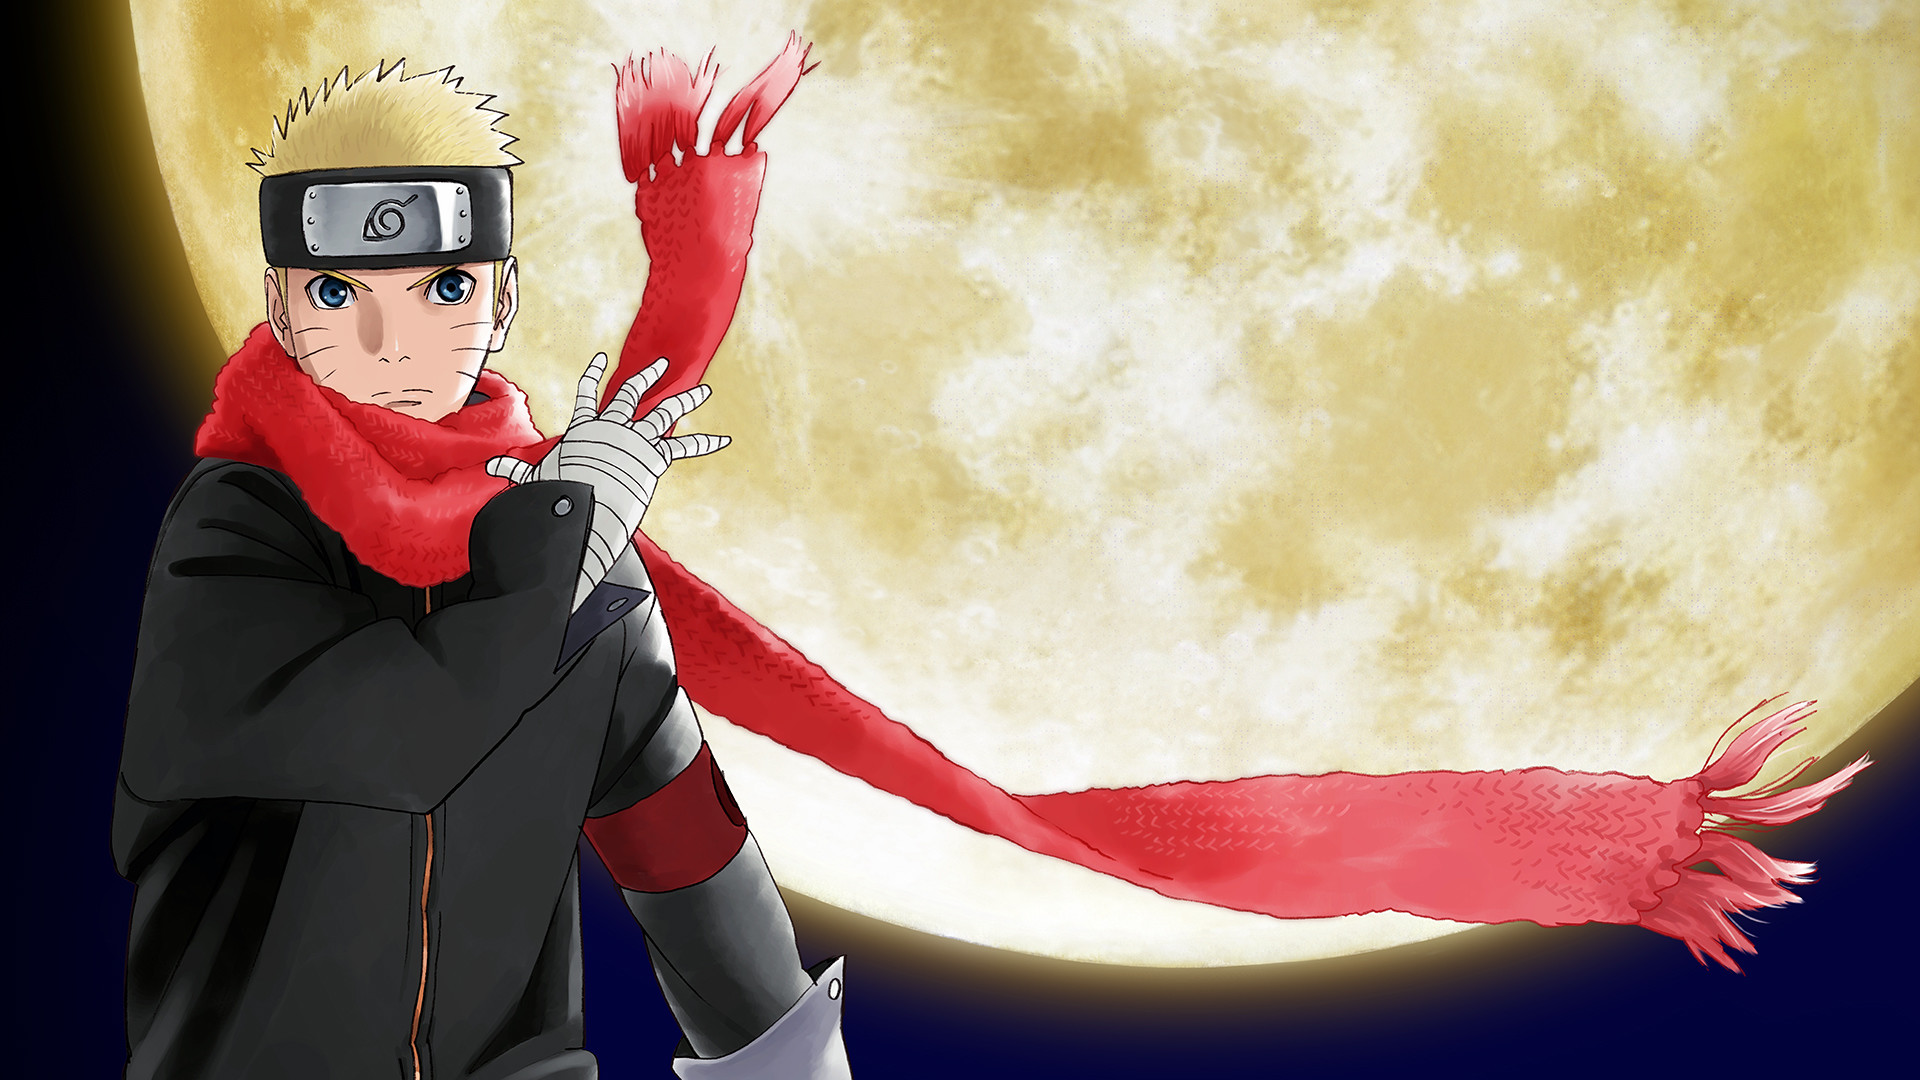 1920x1080 1 The Last: Naruto the Movie HD Wallpapers | Backgrounds - Wallpaper Abyss